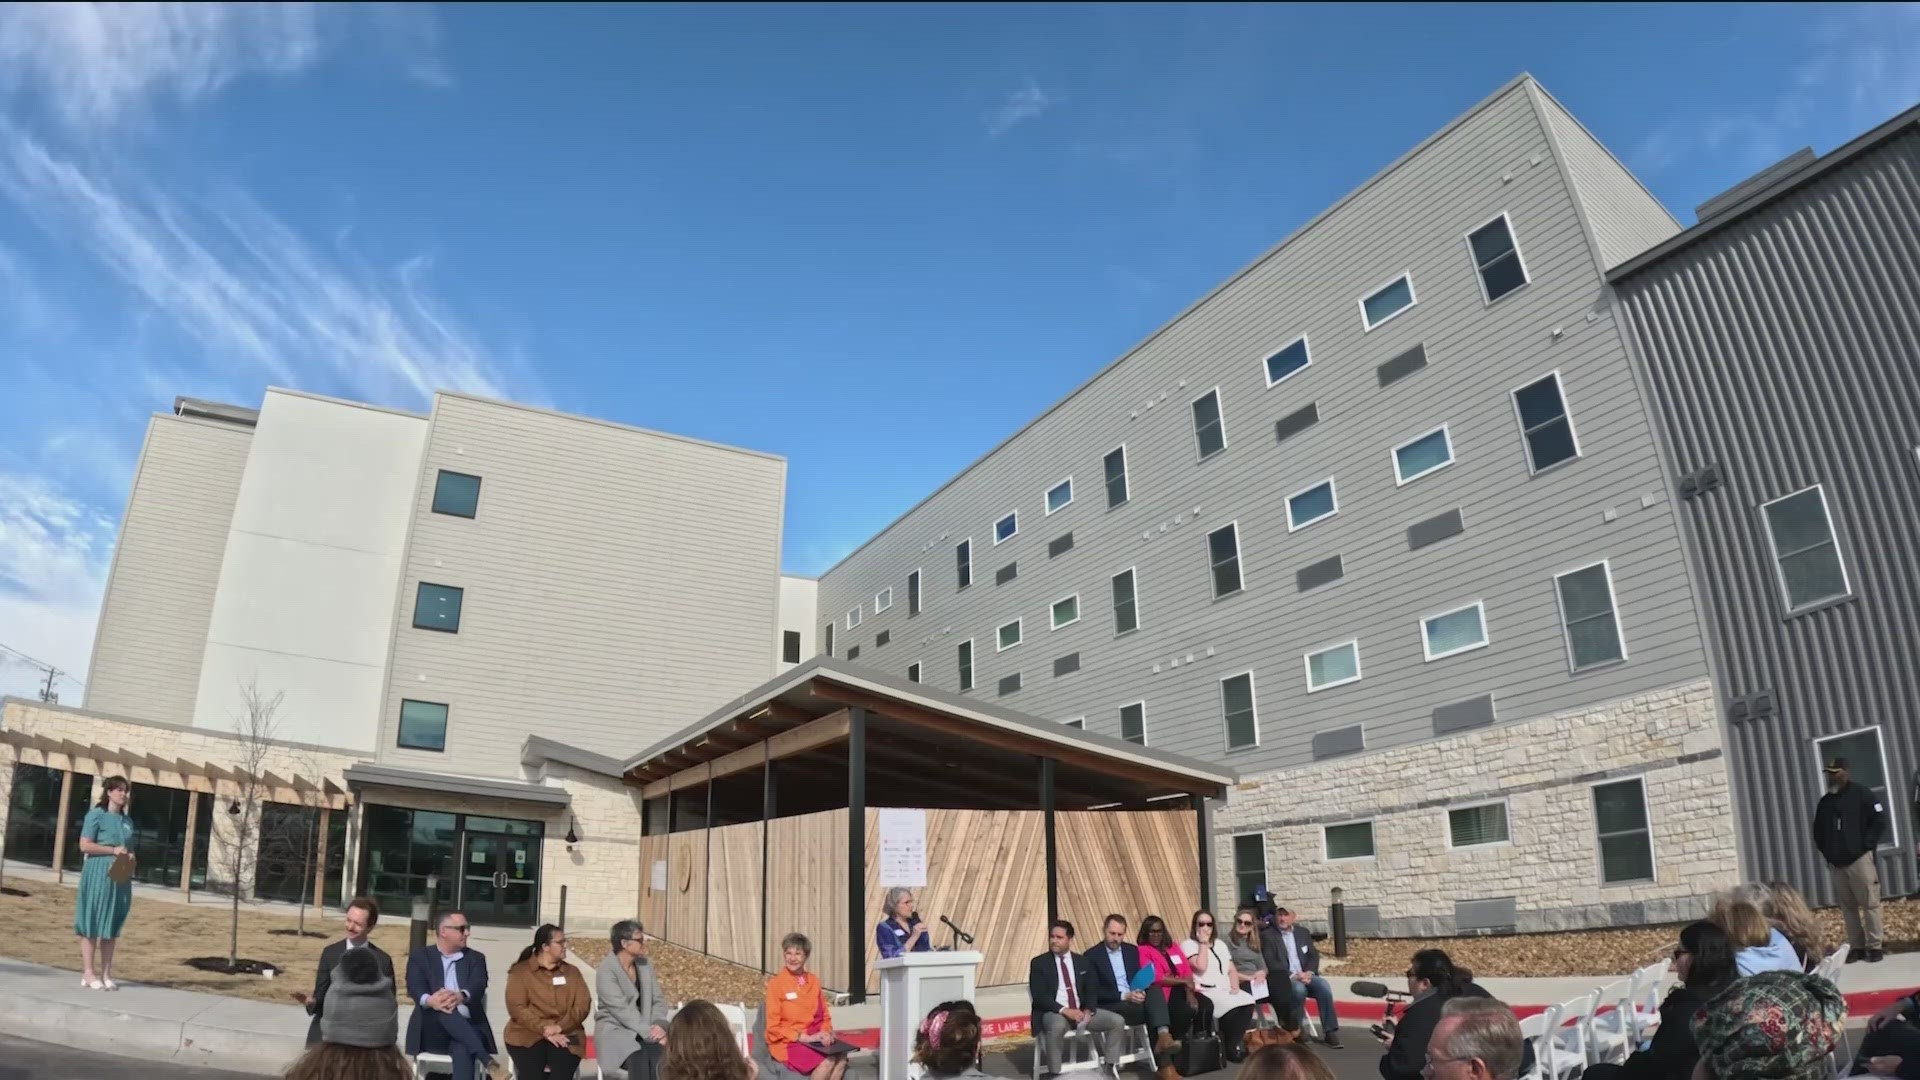 A new apartment complex in North Austin will help house people who have experienced homelessness. The Espero Rutland had its grand opening on Wednesday.